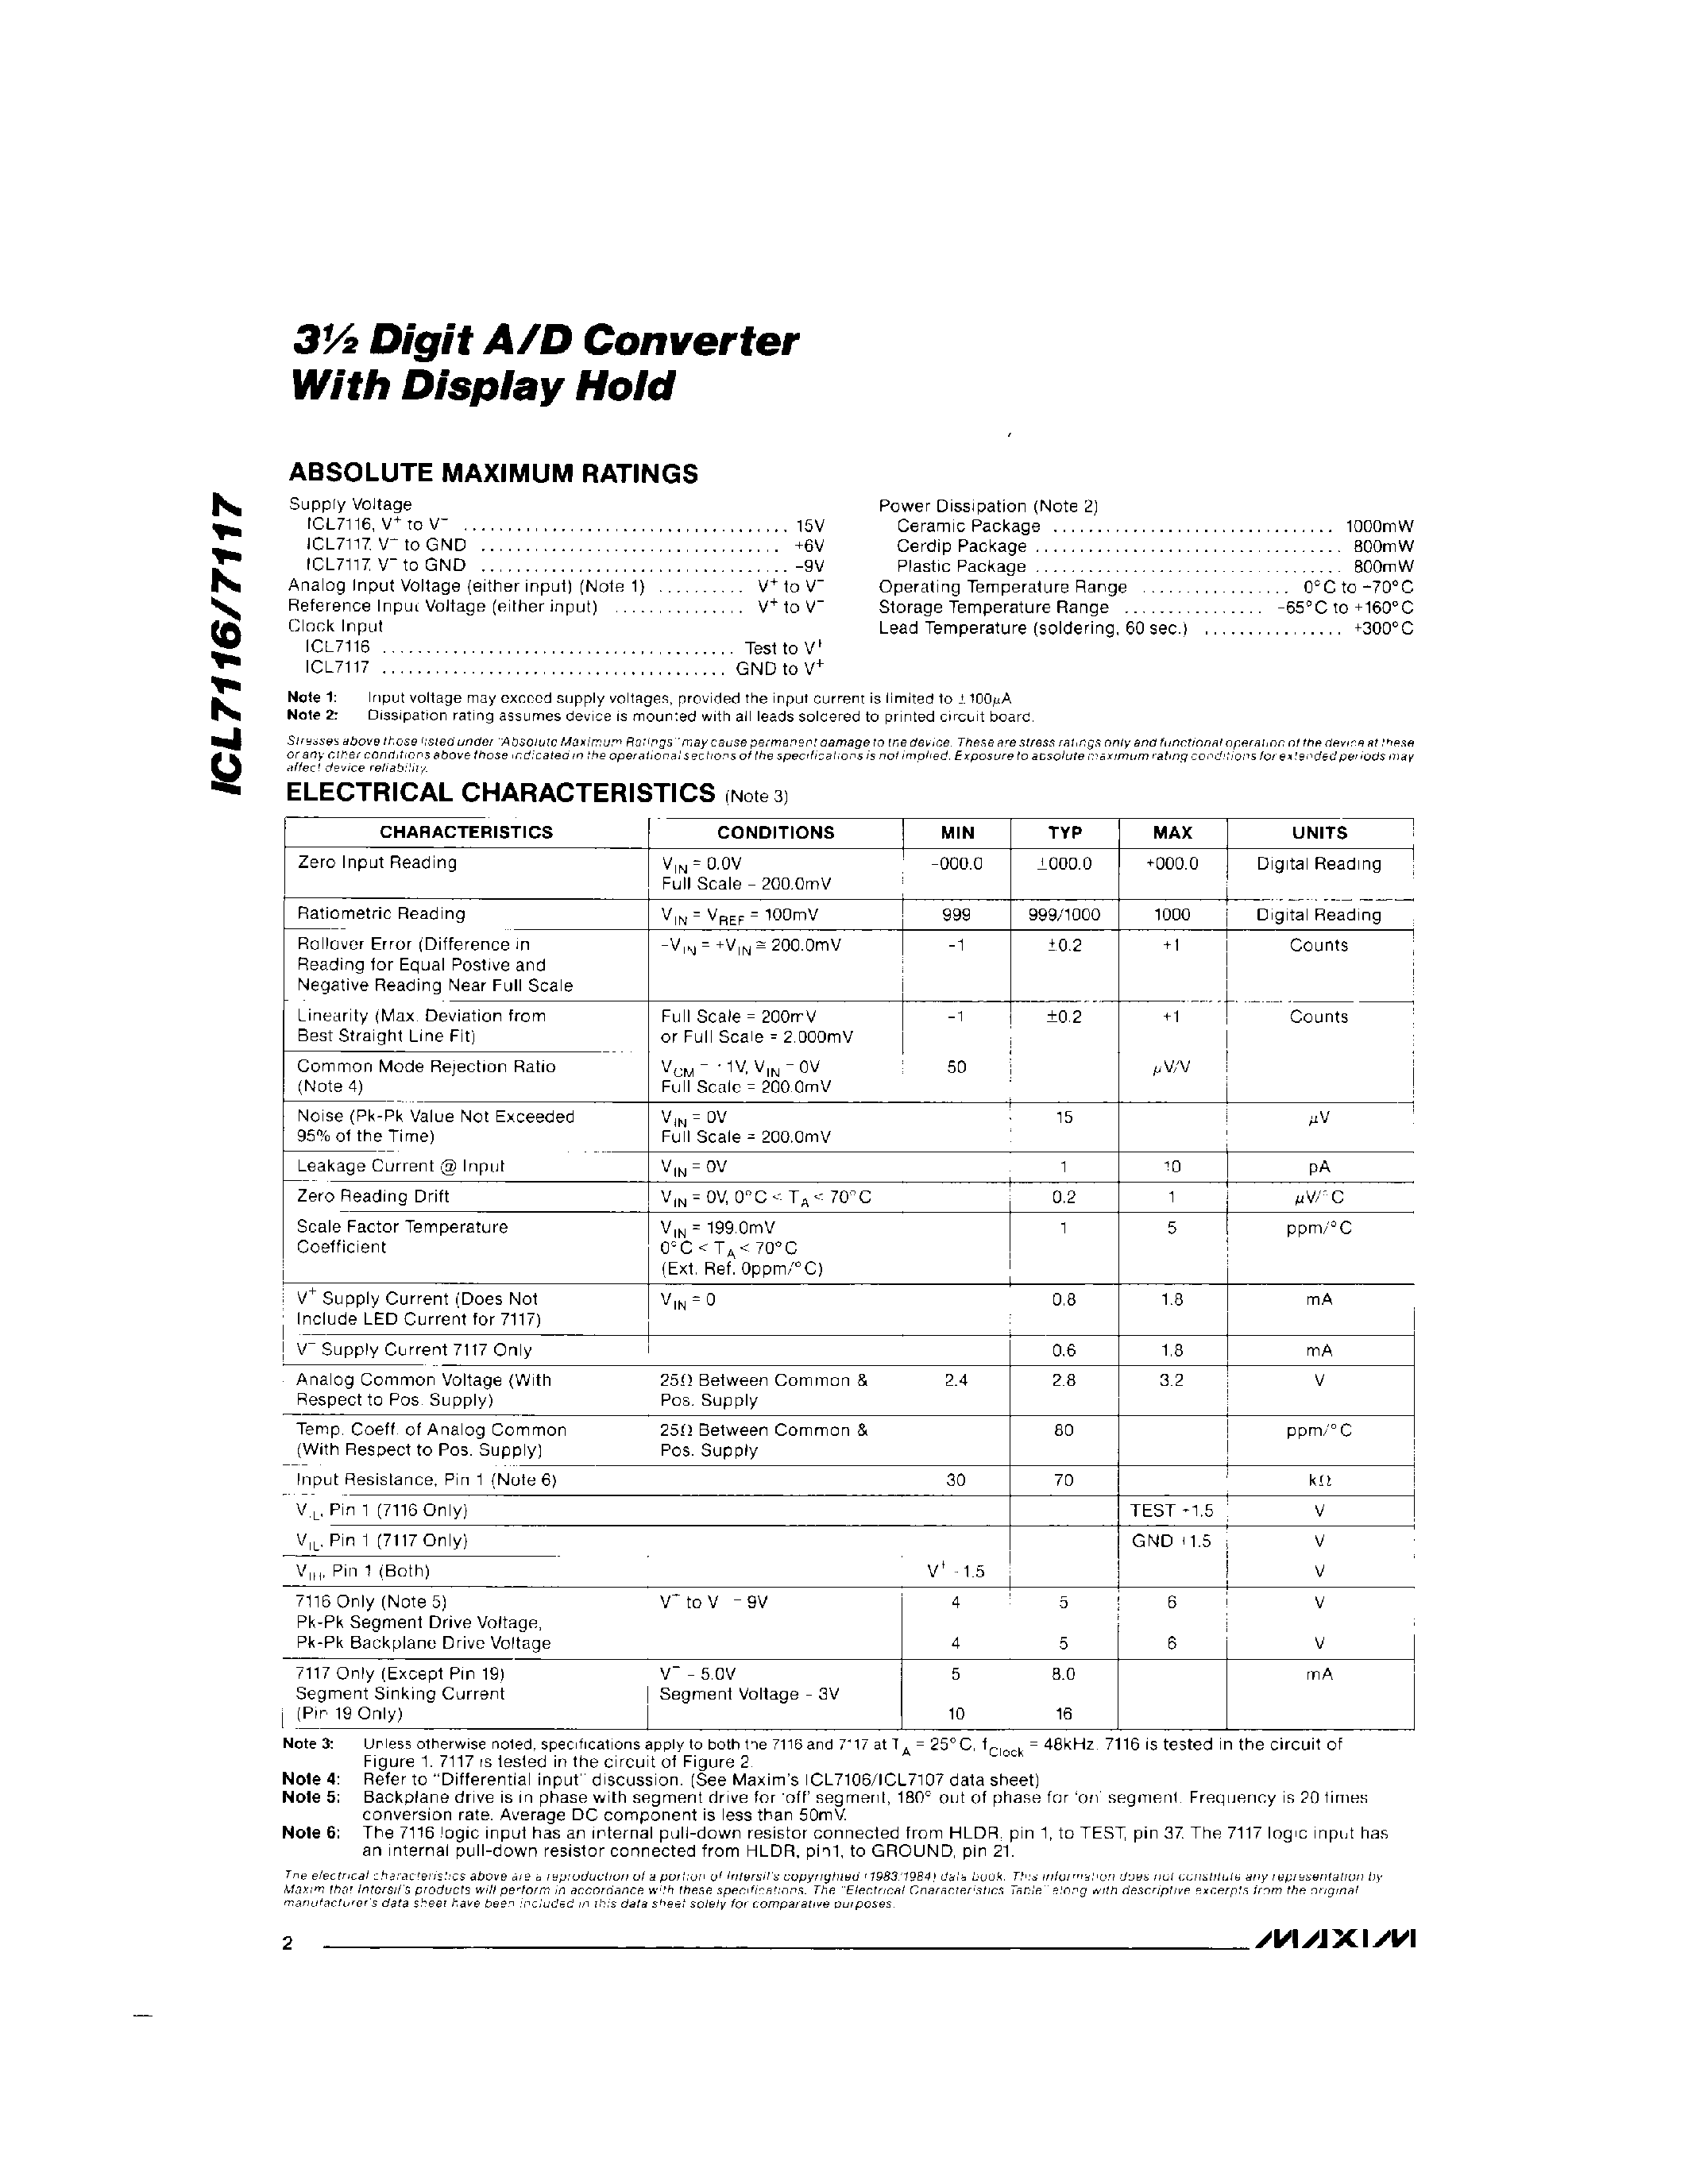 Datasheet ICL7117C/D - 3 Digit A/D Converter With Display Hold page 2